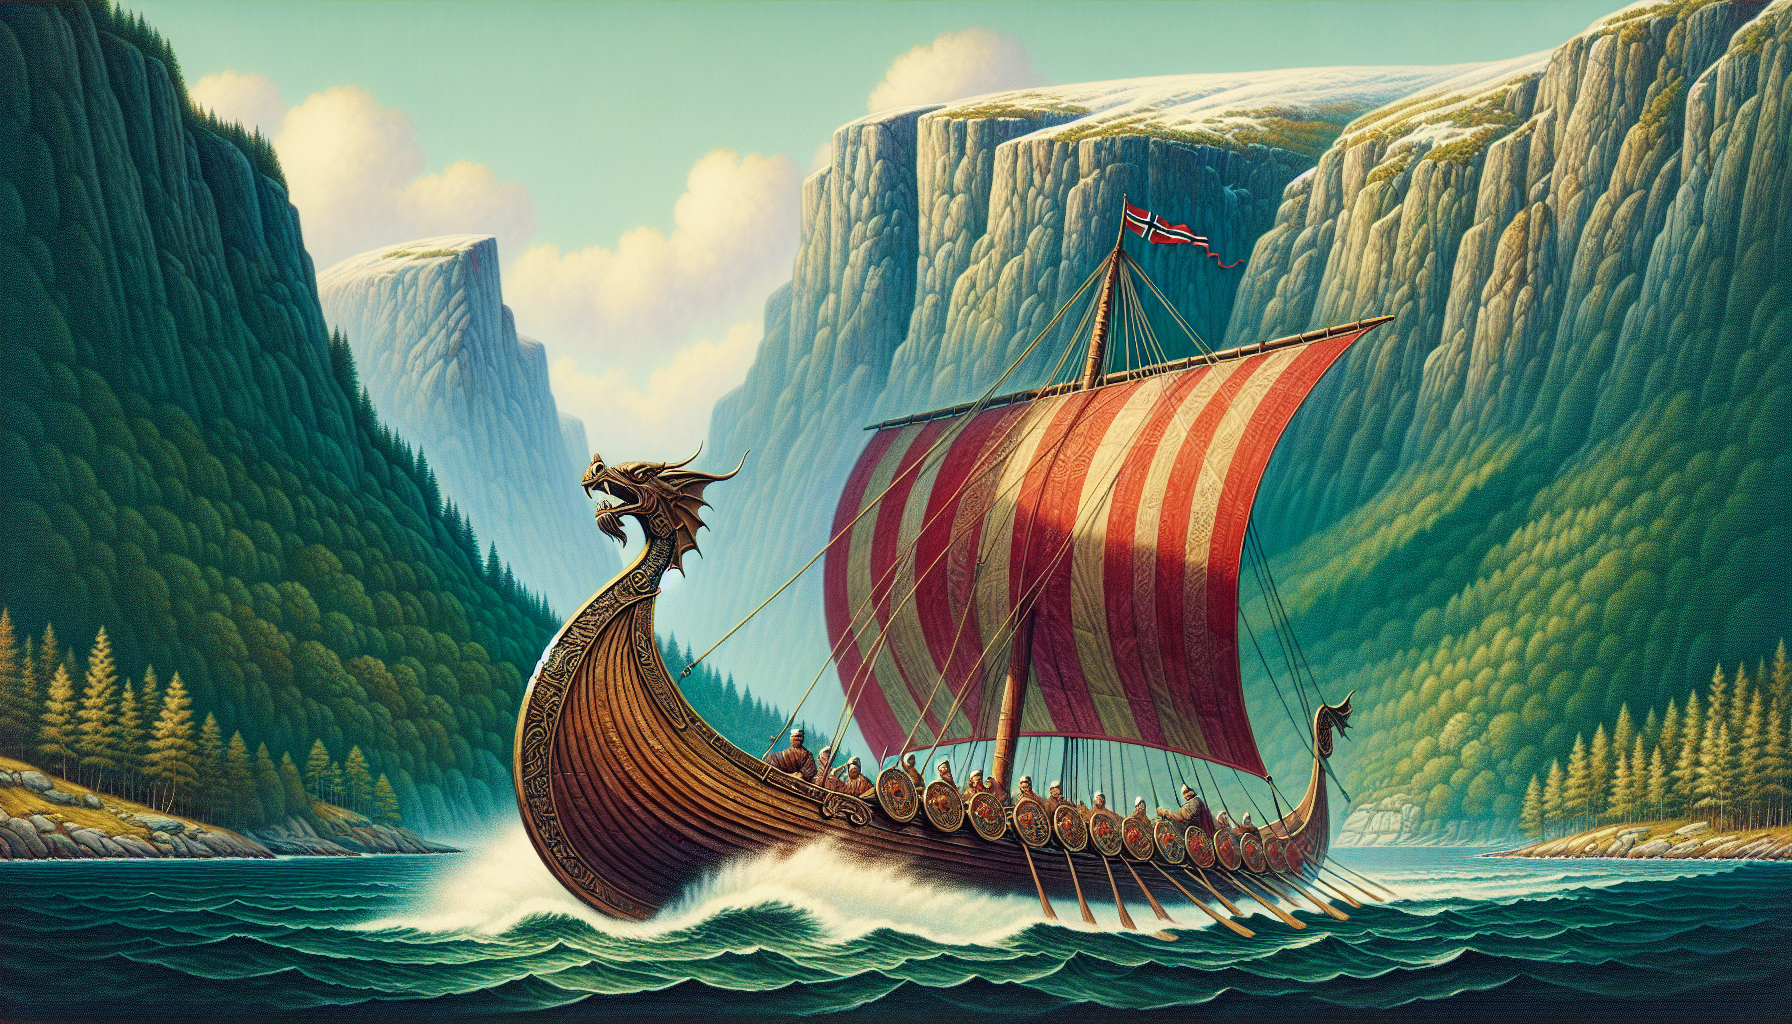 Illustration of Viking ship sailing on the fjord in Norway